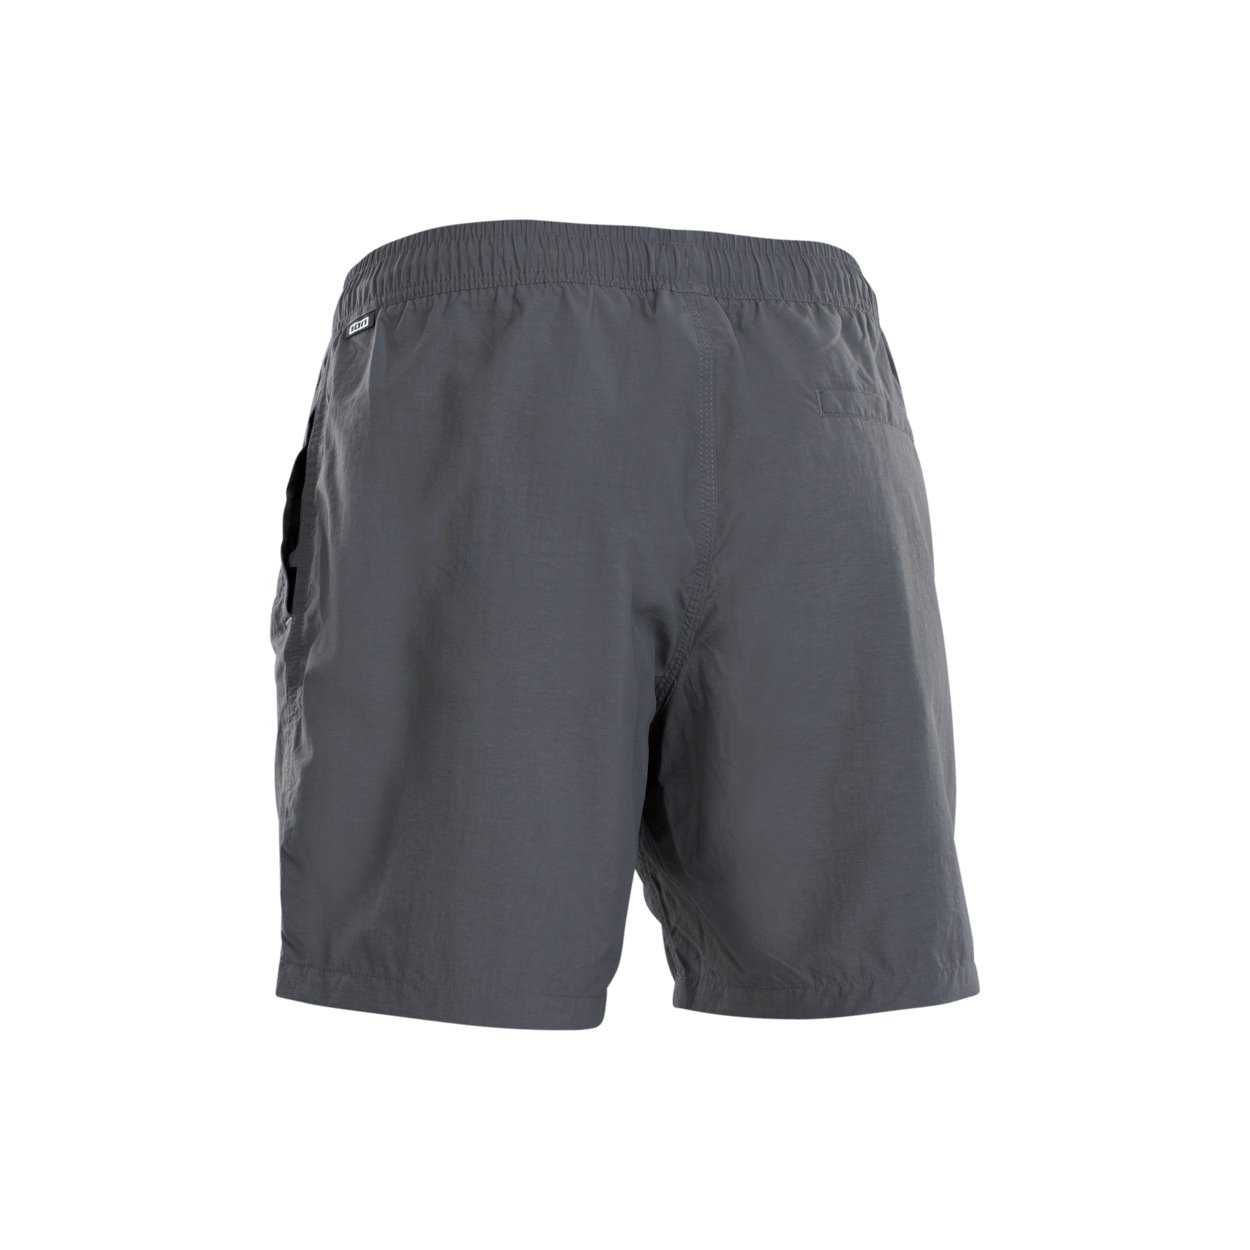 ION Men Boardshorts Volley 17" 2022 - Worthing Watersports - 9008415902637 - Apparel - ION Bike